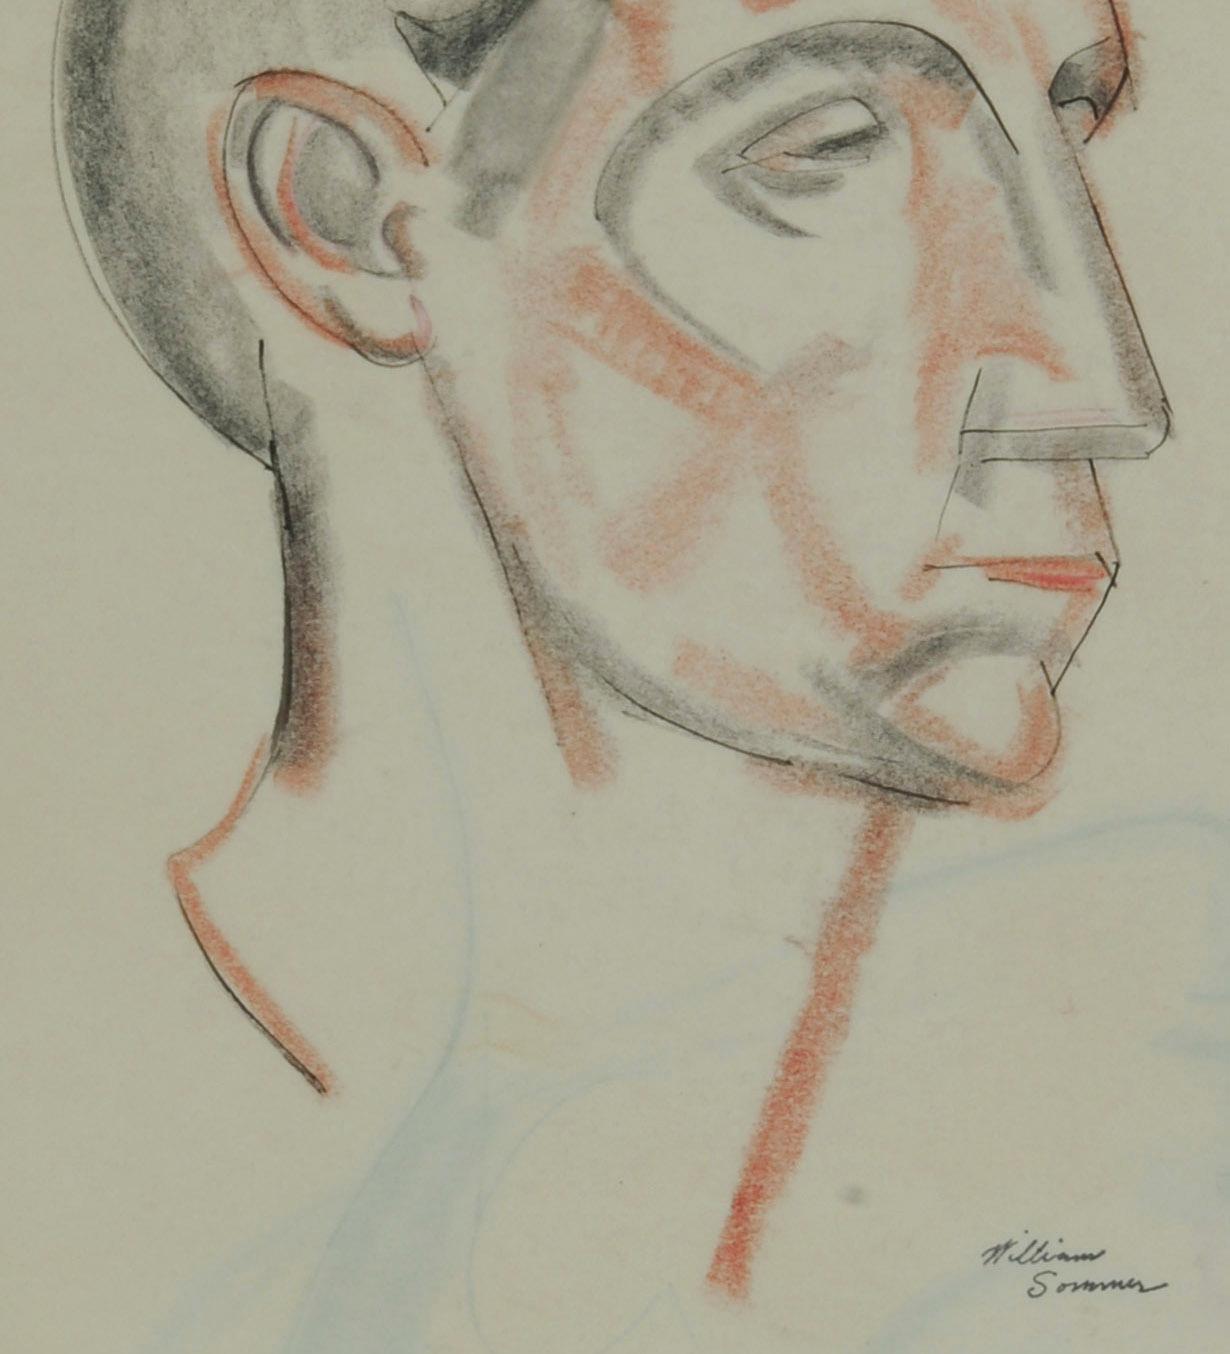 Head of a Man (recto) Sketch of a Man's Head (verso) - Brown Figurative Art by William Sommer